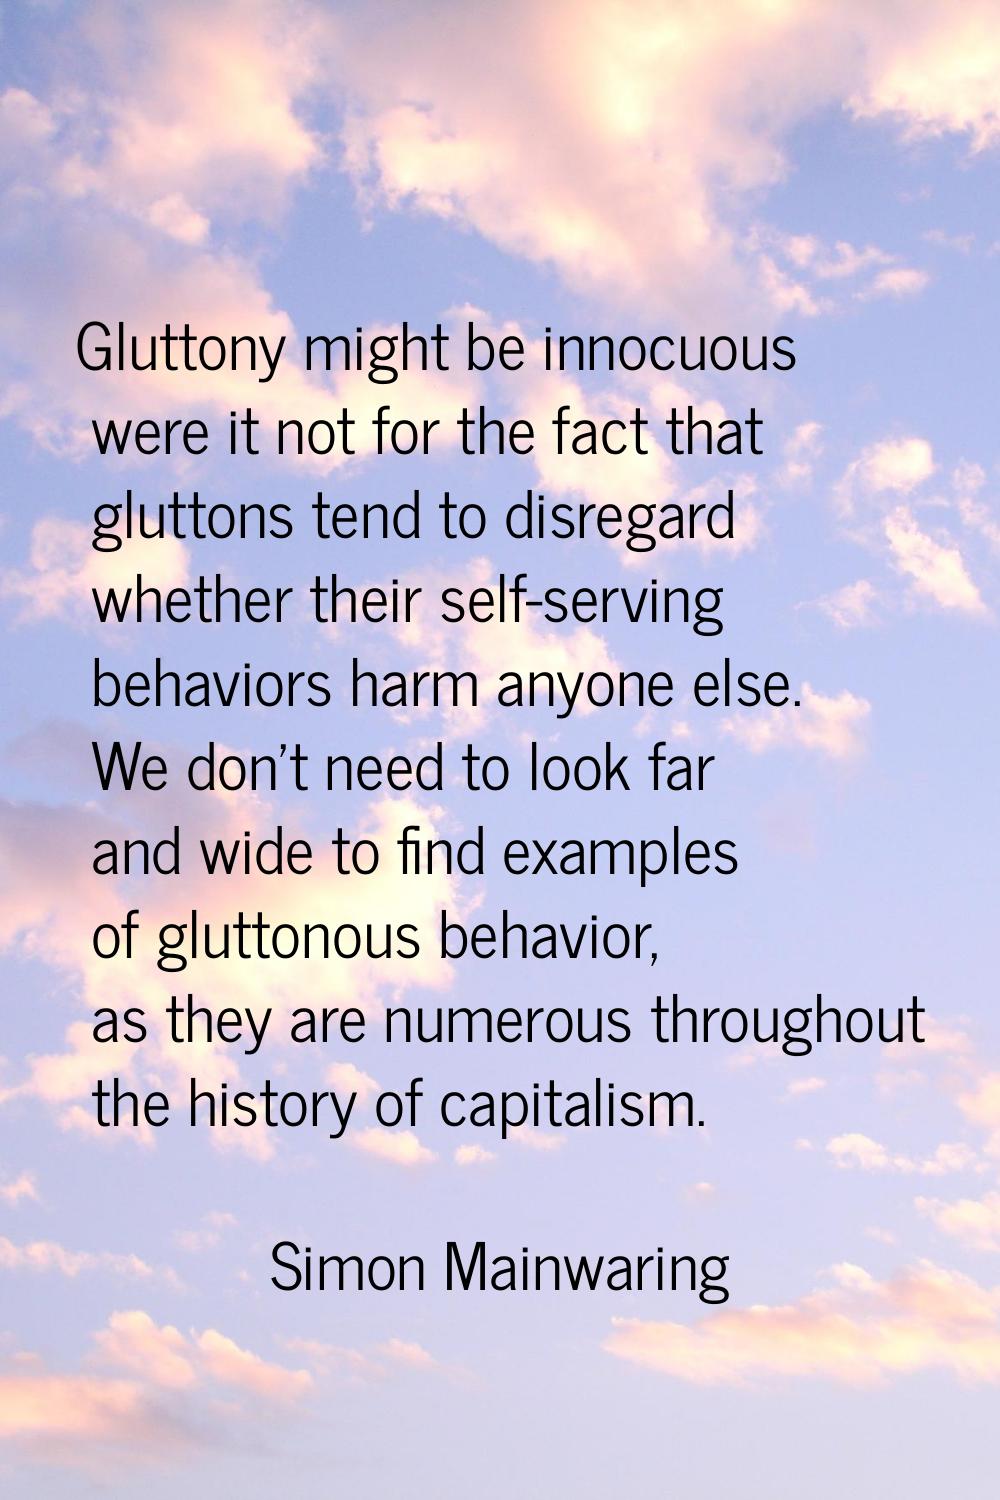 Gluttony might be innocuous were it not for the fact that gluttons tend to disregard whether their 